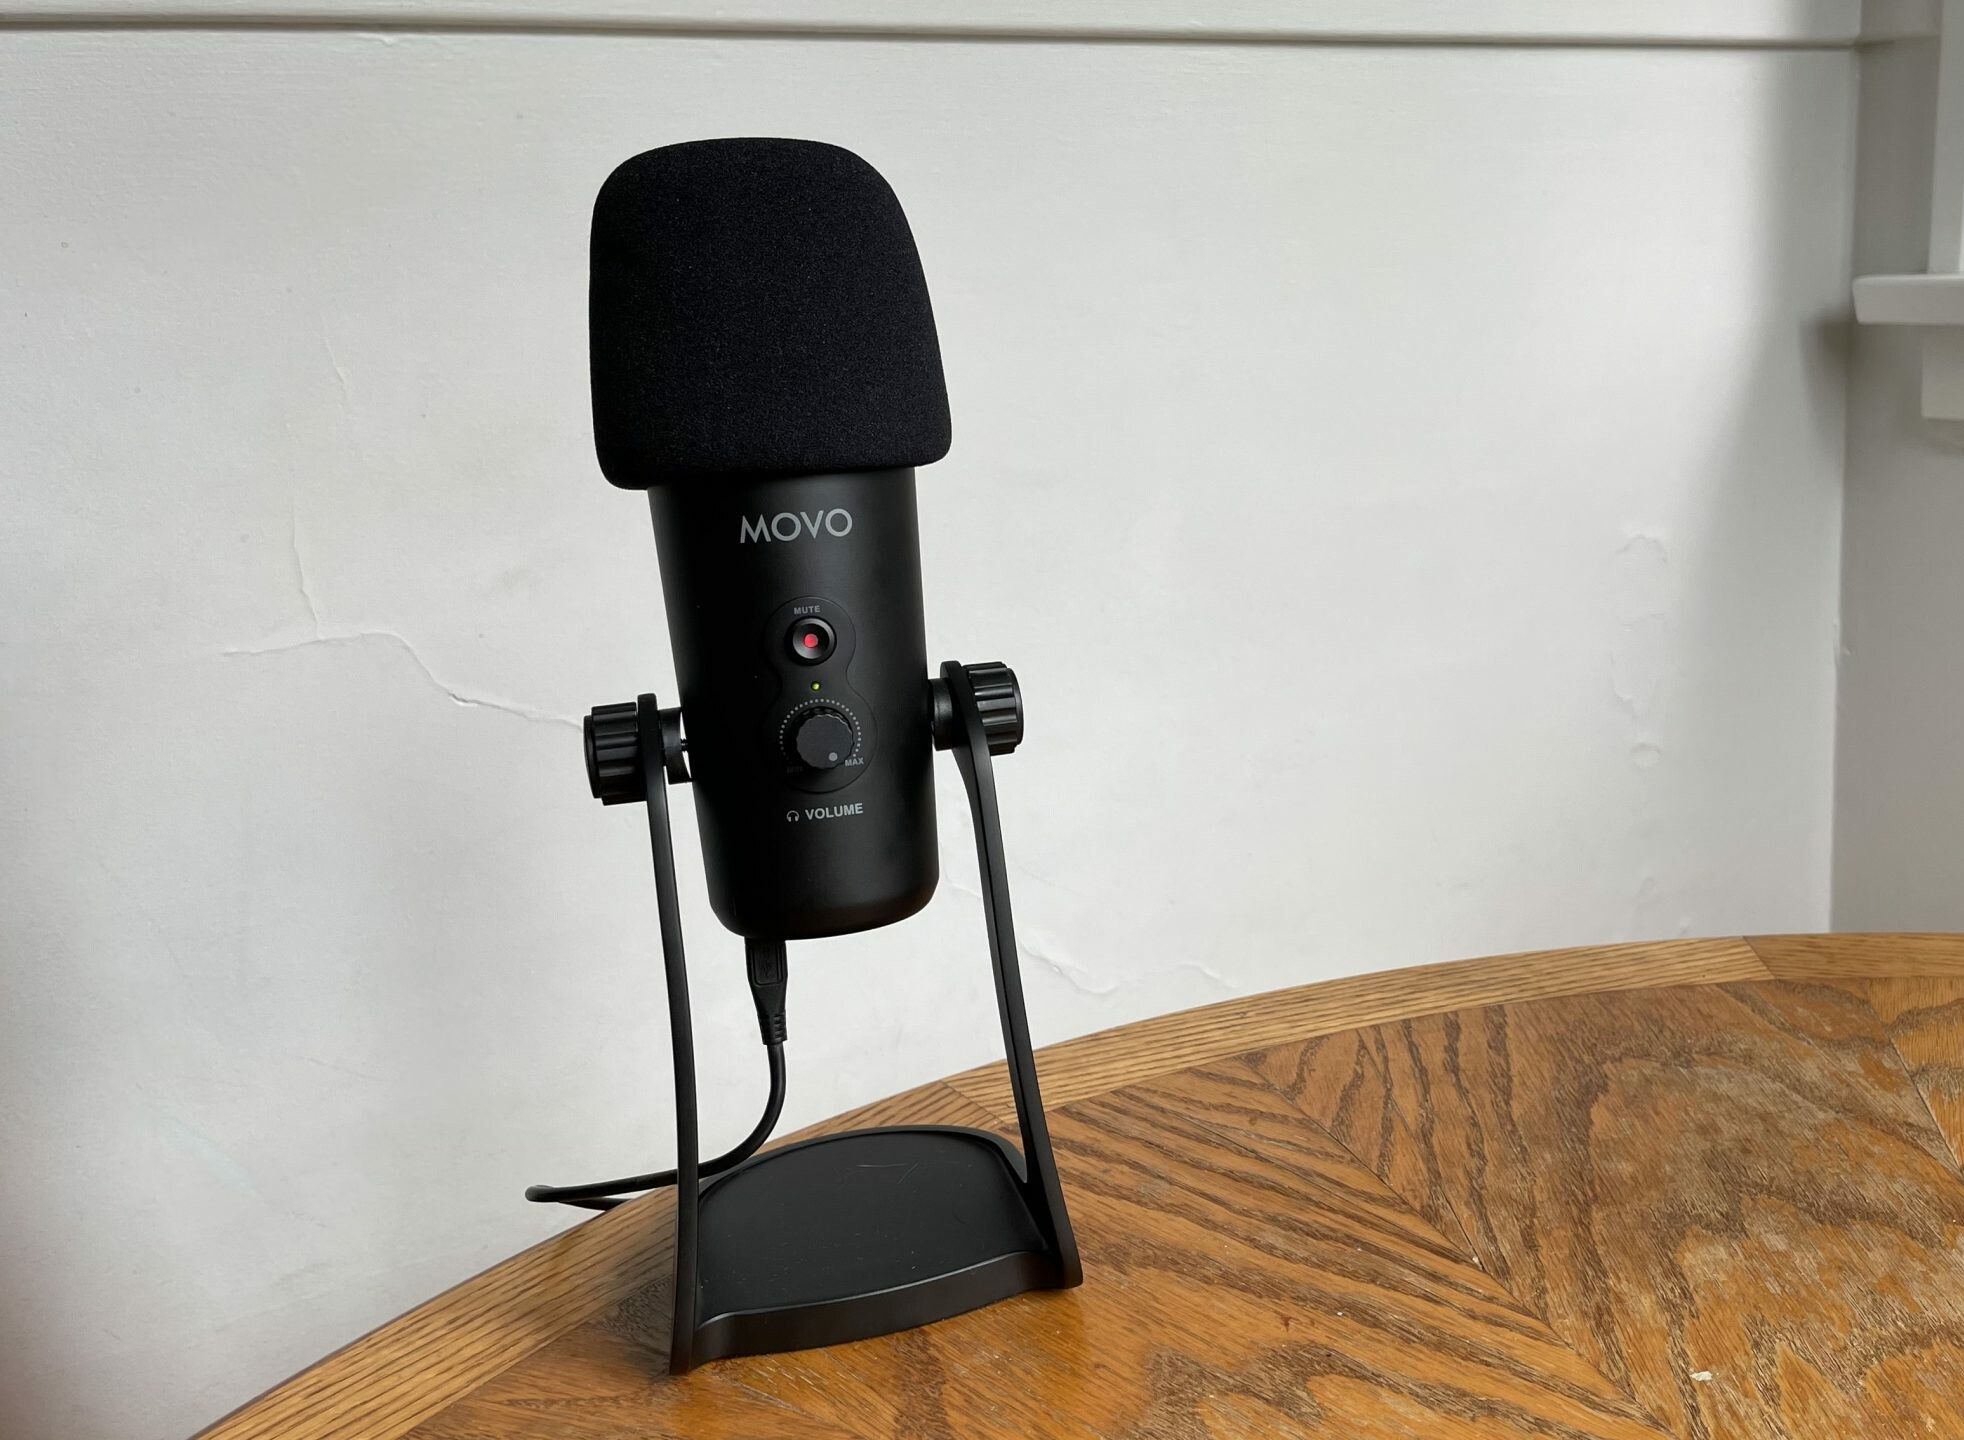 The Movo UM700 on a wooden table.